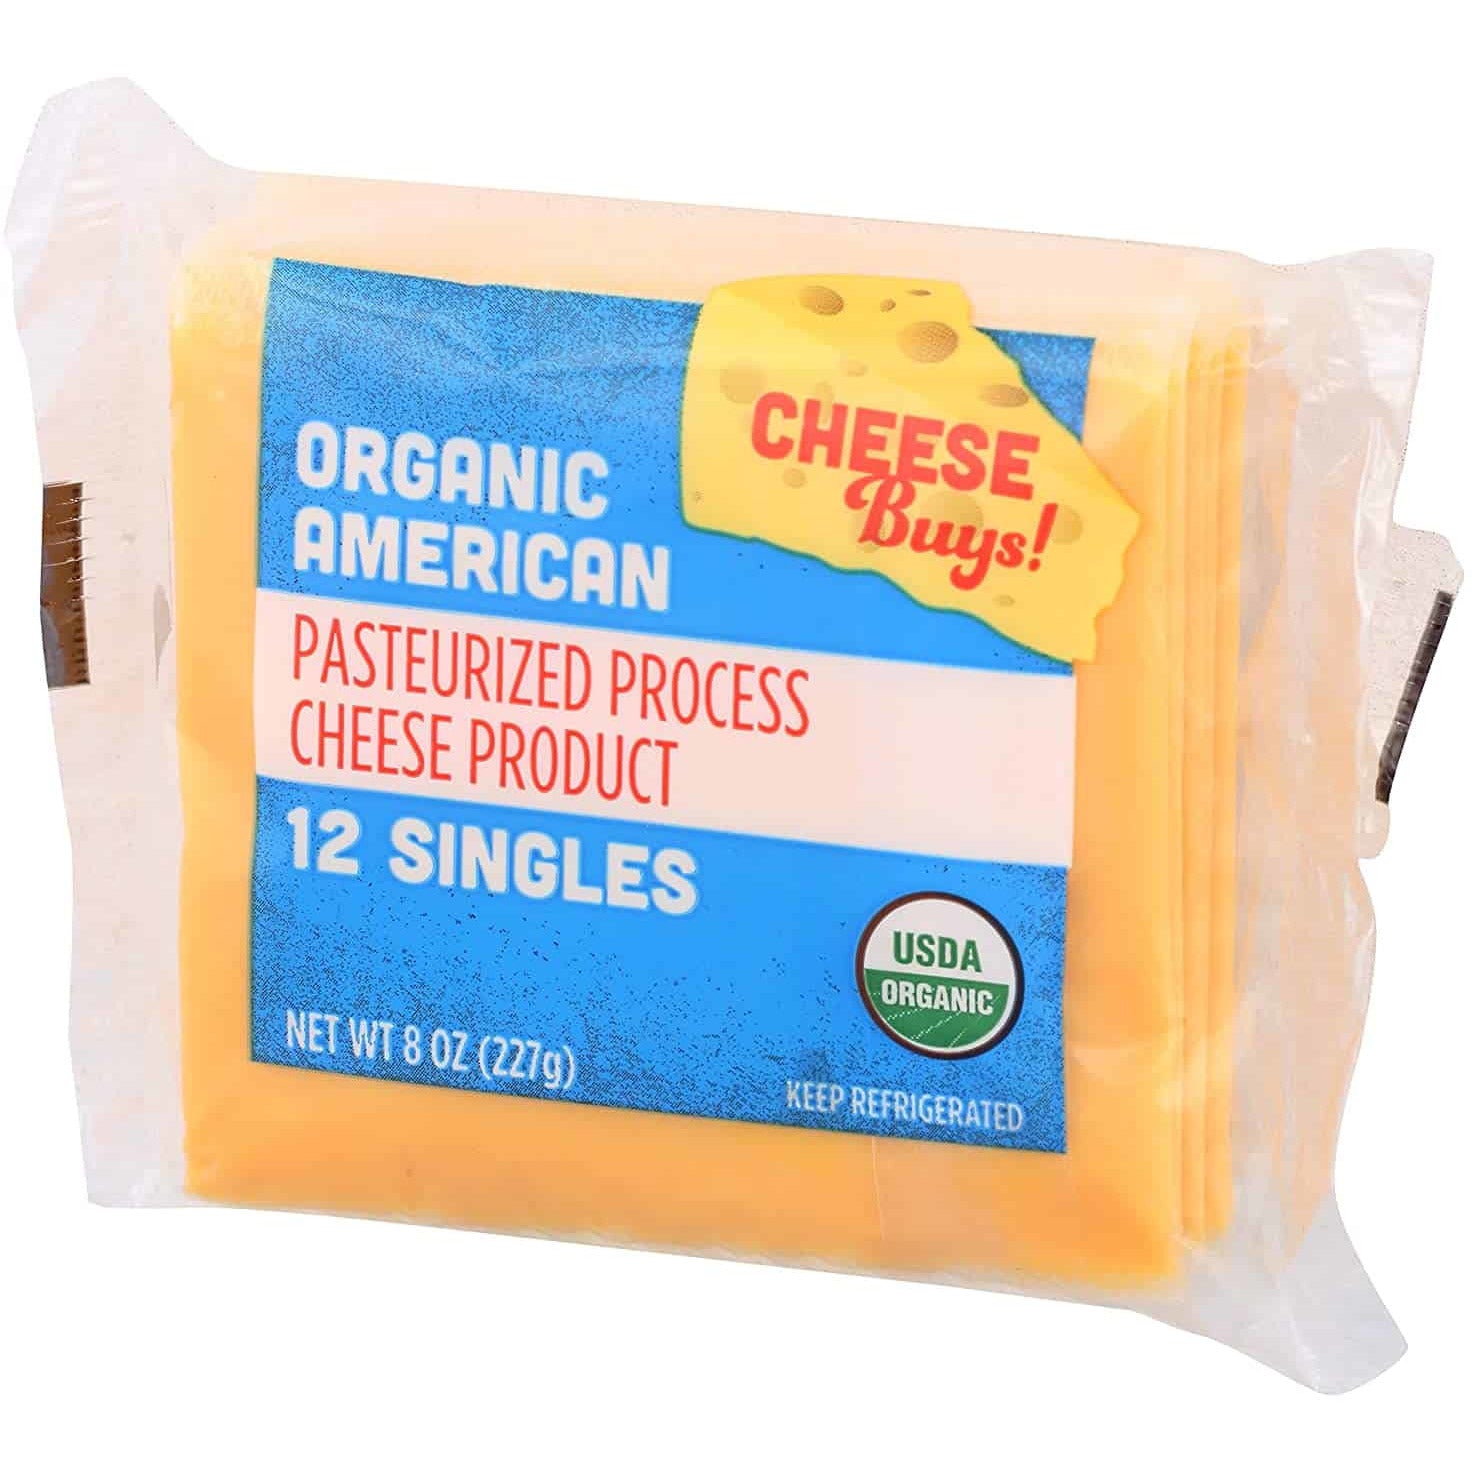 Oasis Fresh Cheese Buys, Organic American Cheese, Slices, 8 oz